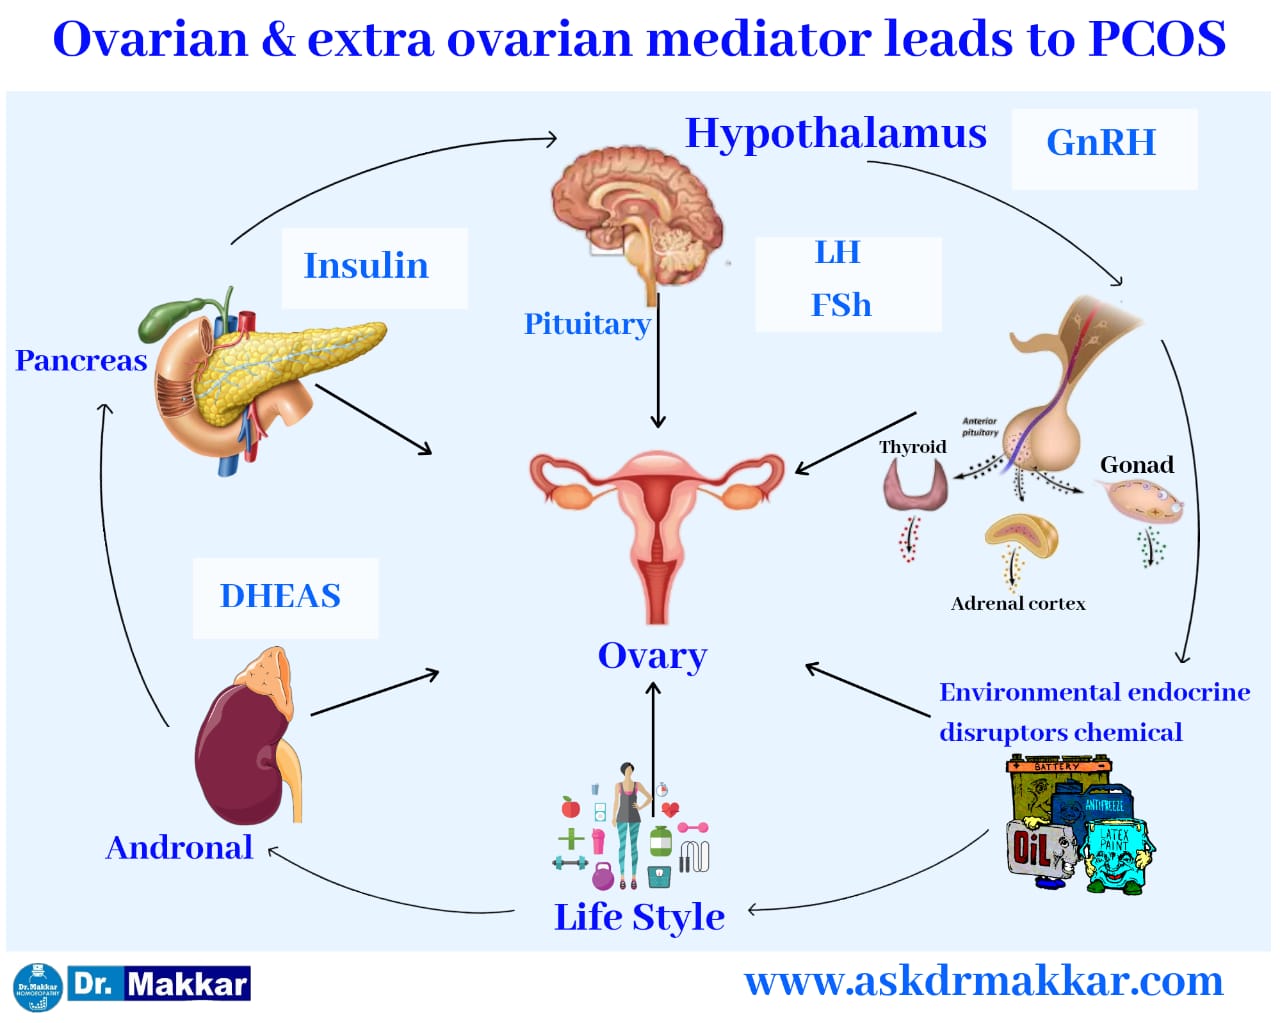 Ovarian & extraovarian factors leads to PCOS